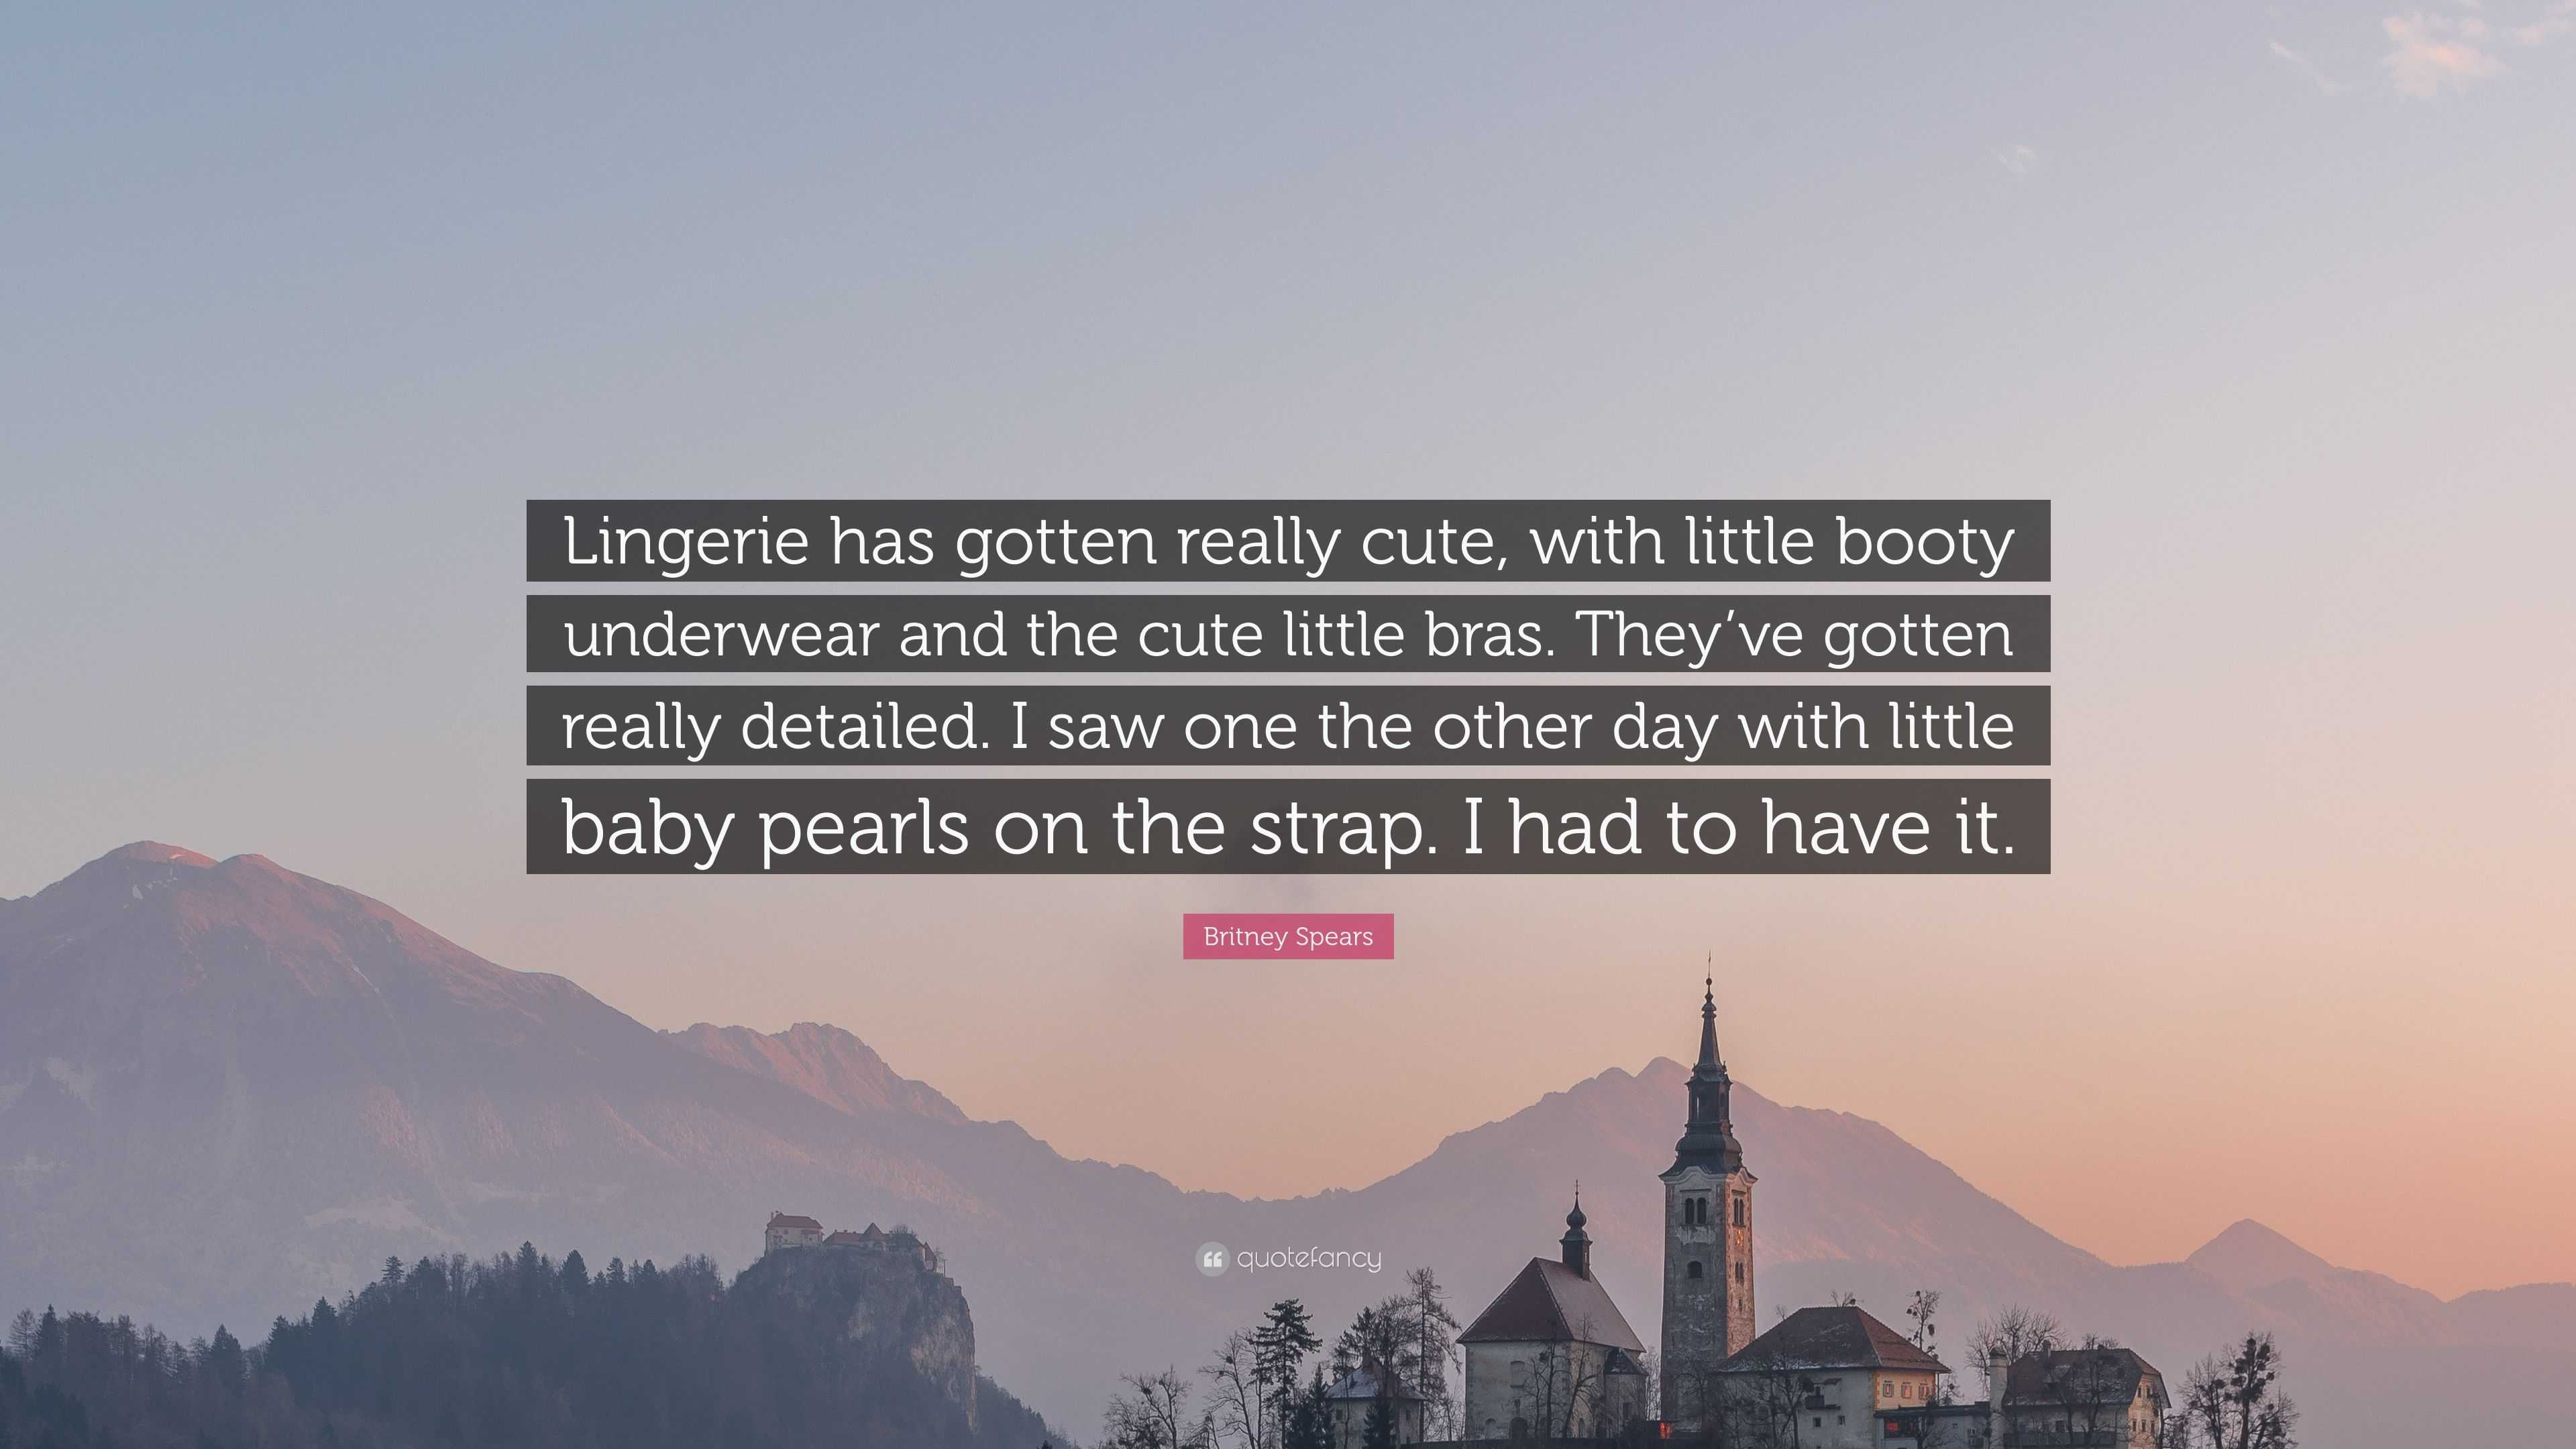 Britney Spears Quote: “Lingerie has gotten really cute, with little booty  underwear and the cute little bras. They've gotten really detailed. I”